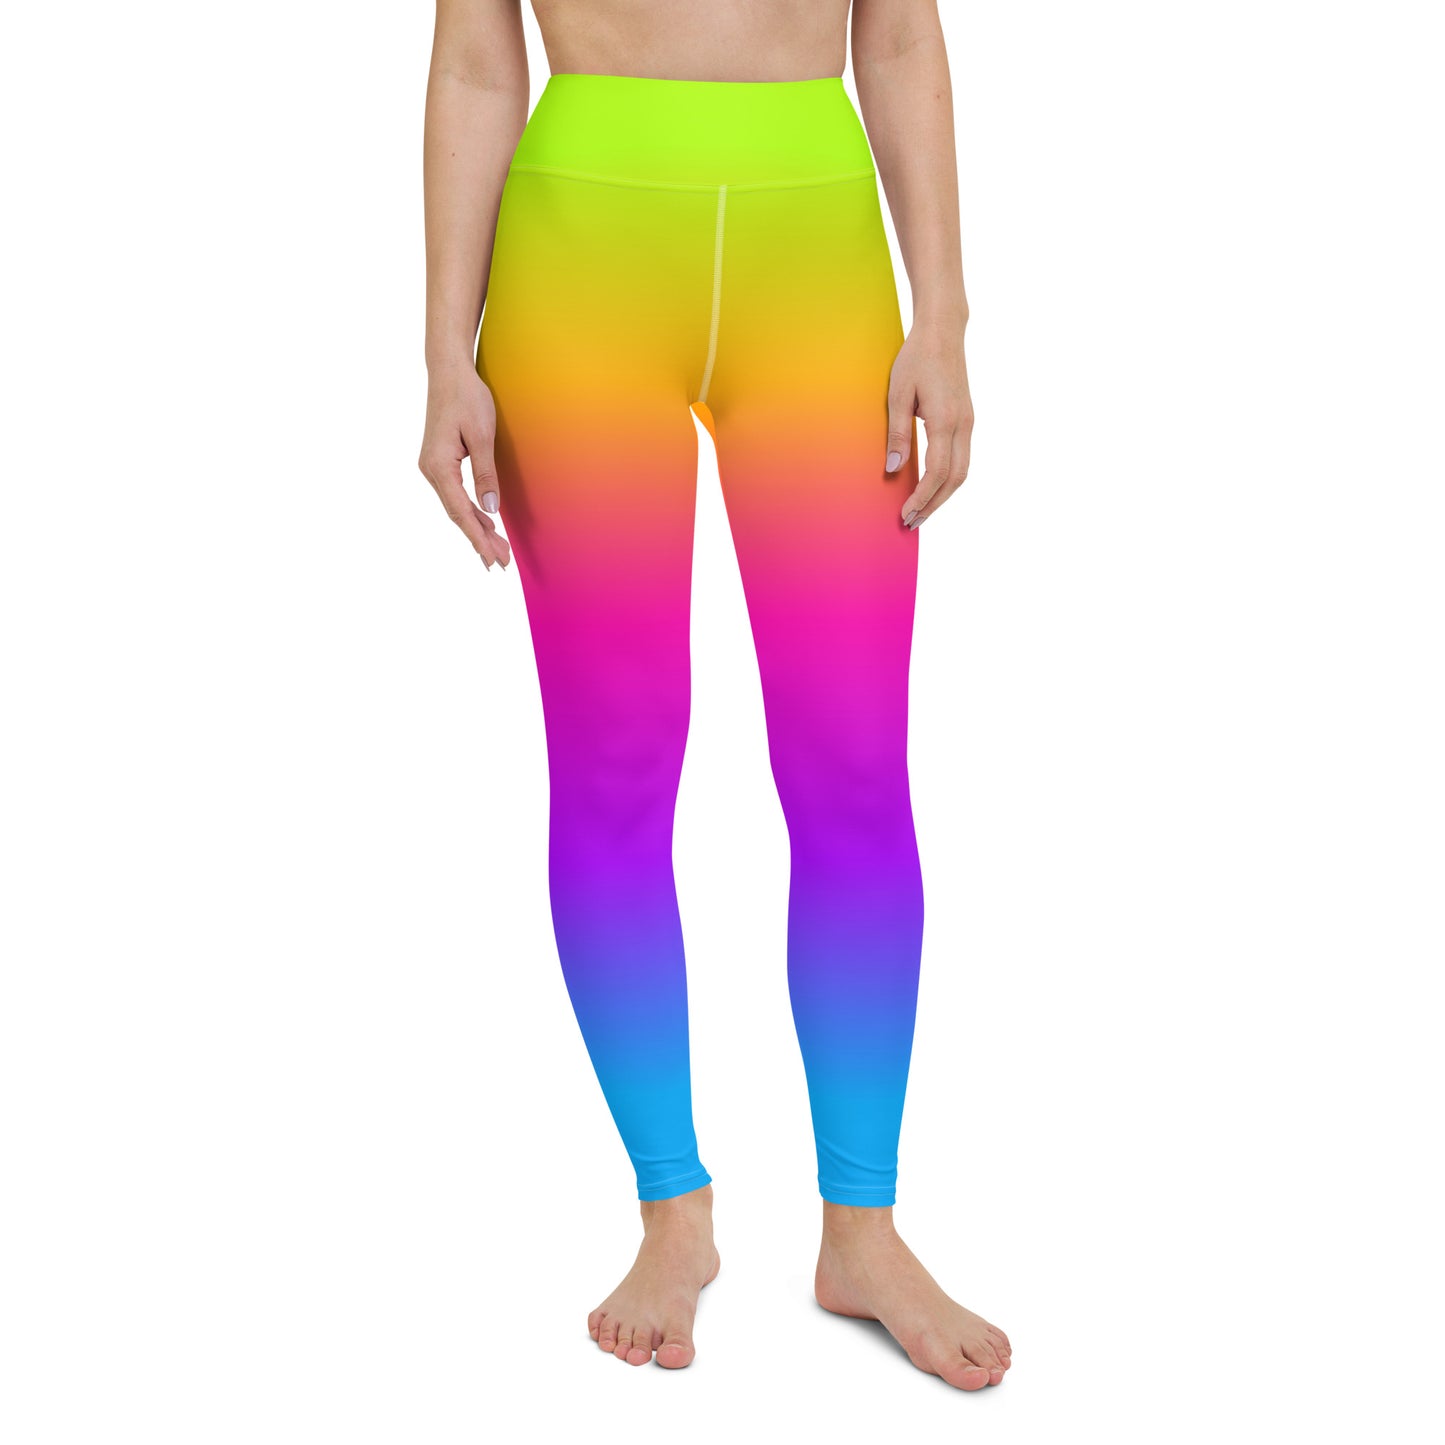 Rainbow Yoga Leggings Women, Tie Dye Gradient Ombre High Waisted Pants Pockets Cute Printed Workout Running Gym Designer Tights Starcove Fashion